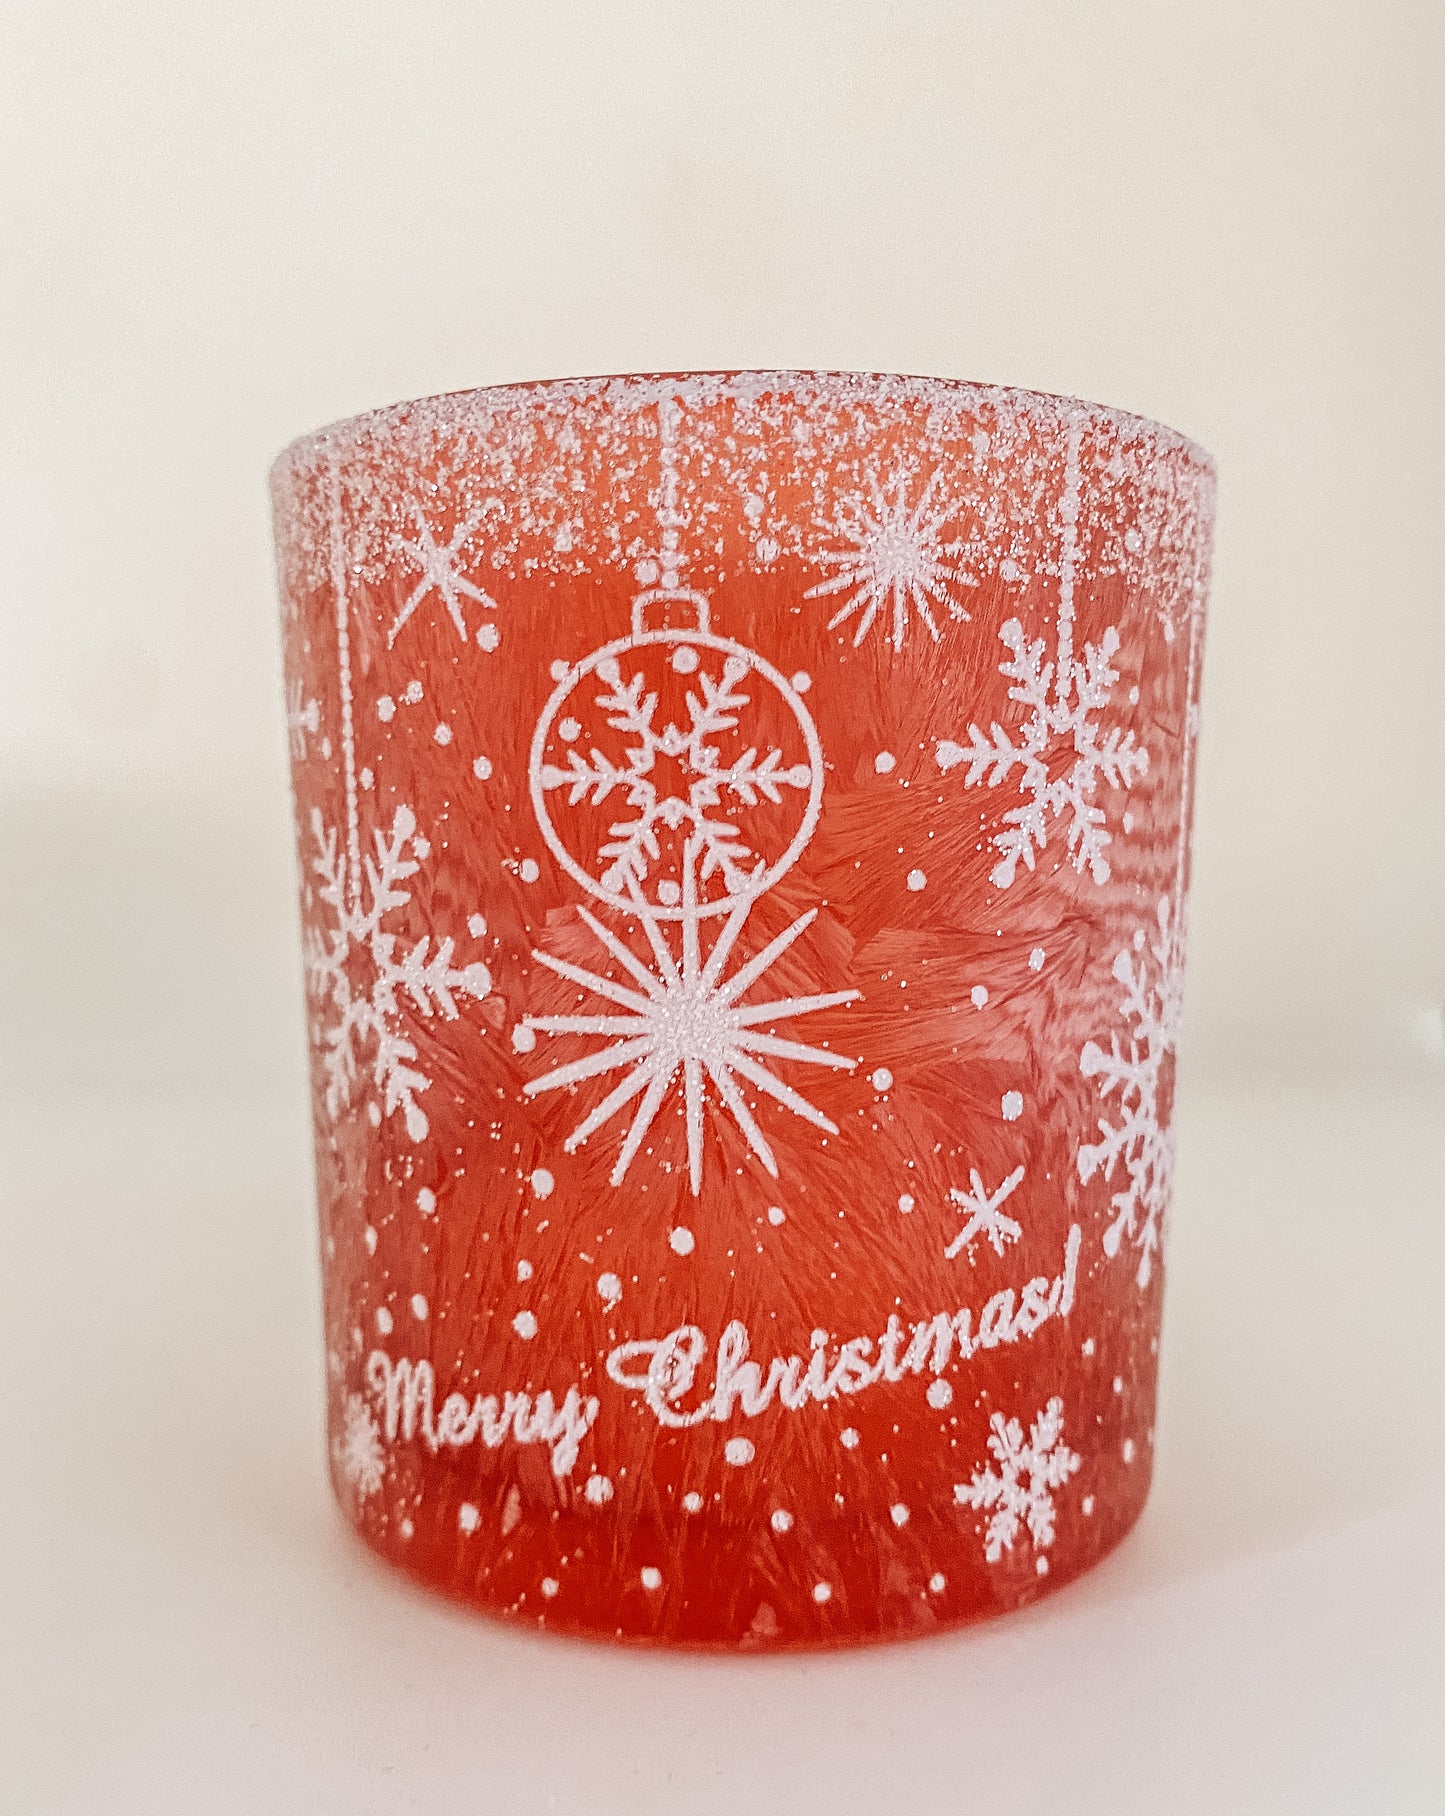 160g Merry Christmas candle